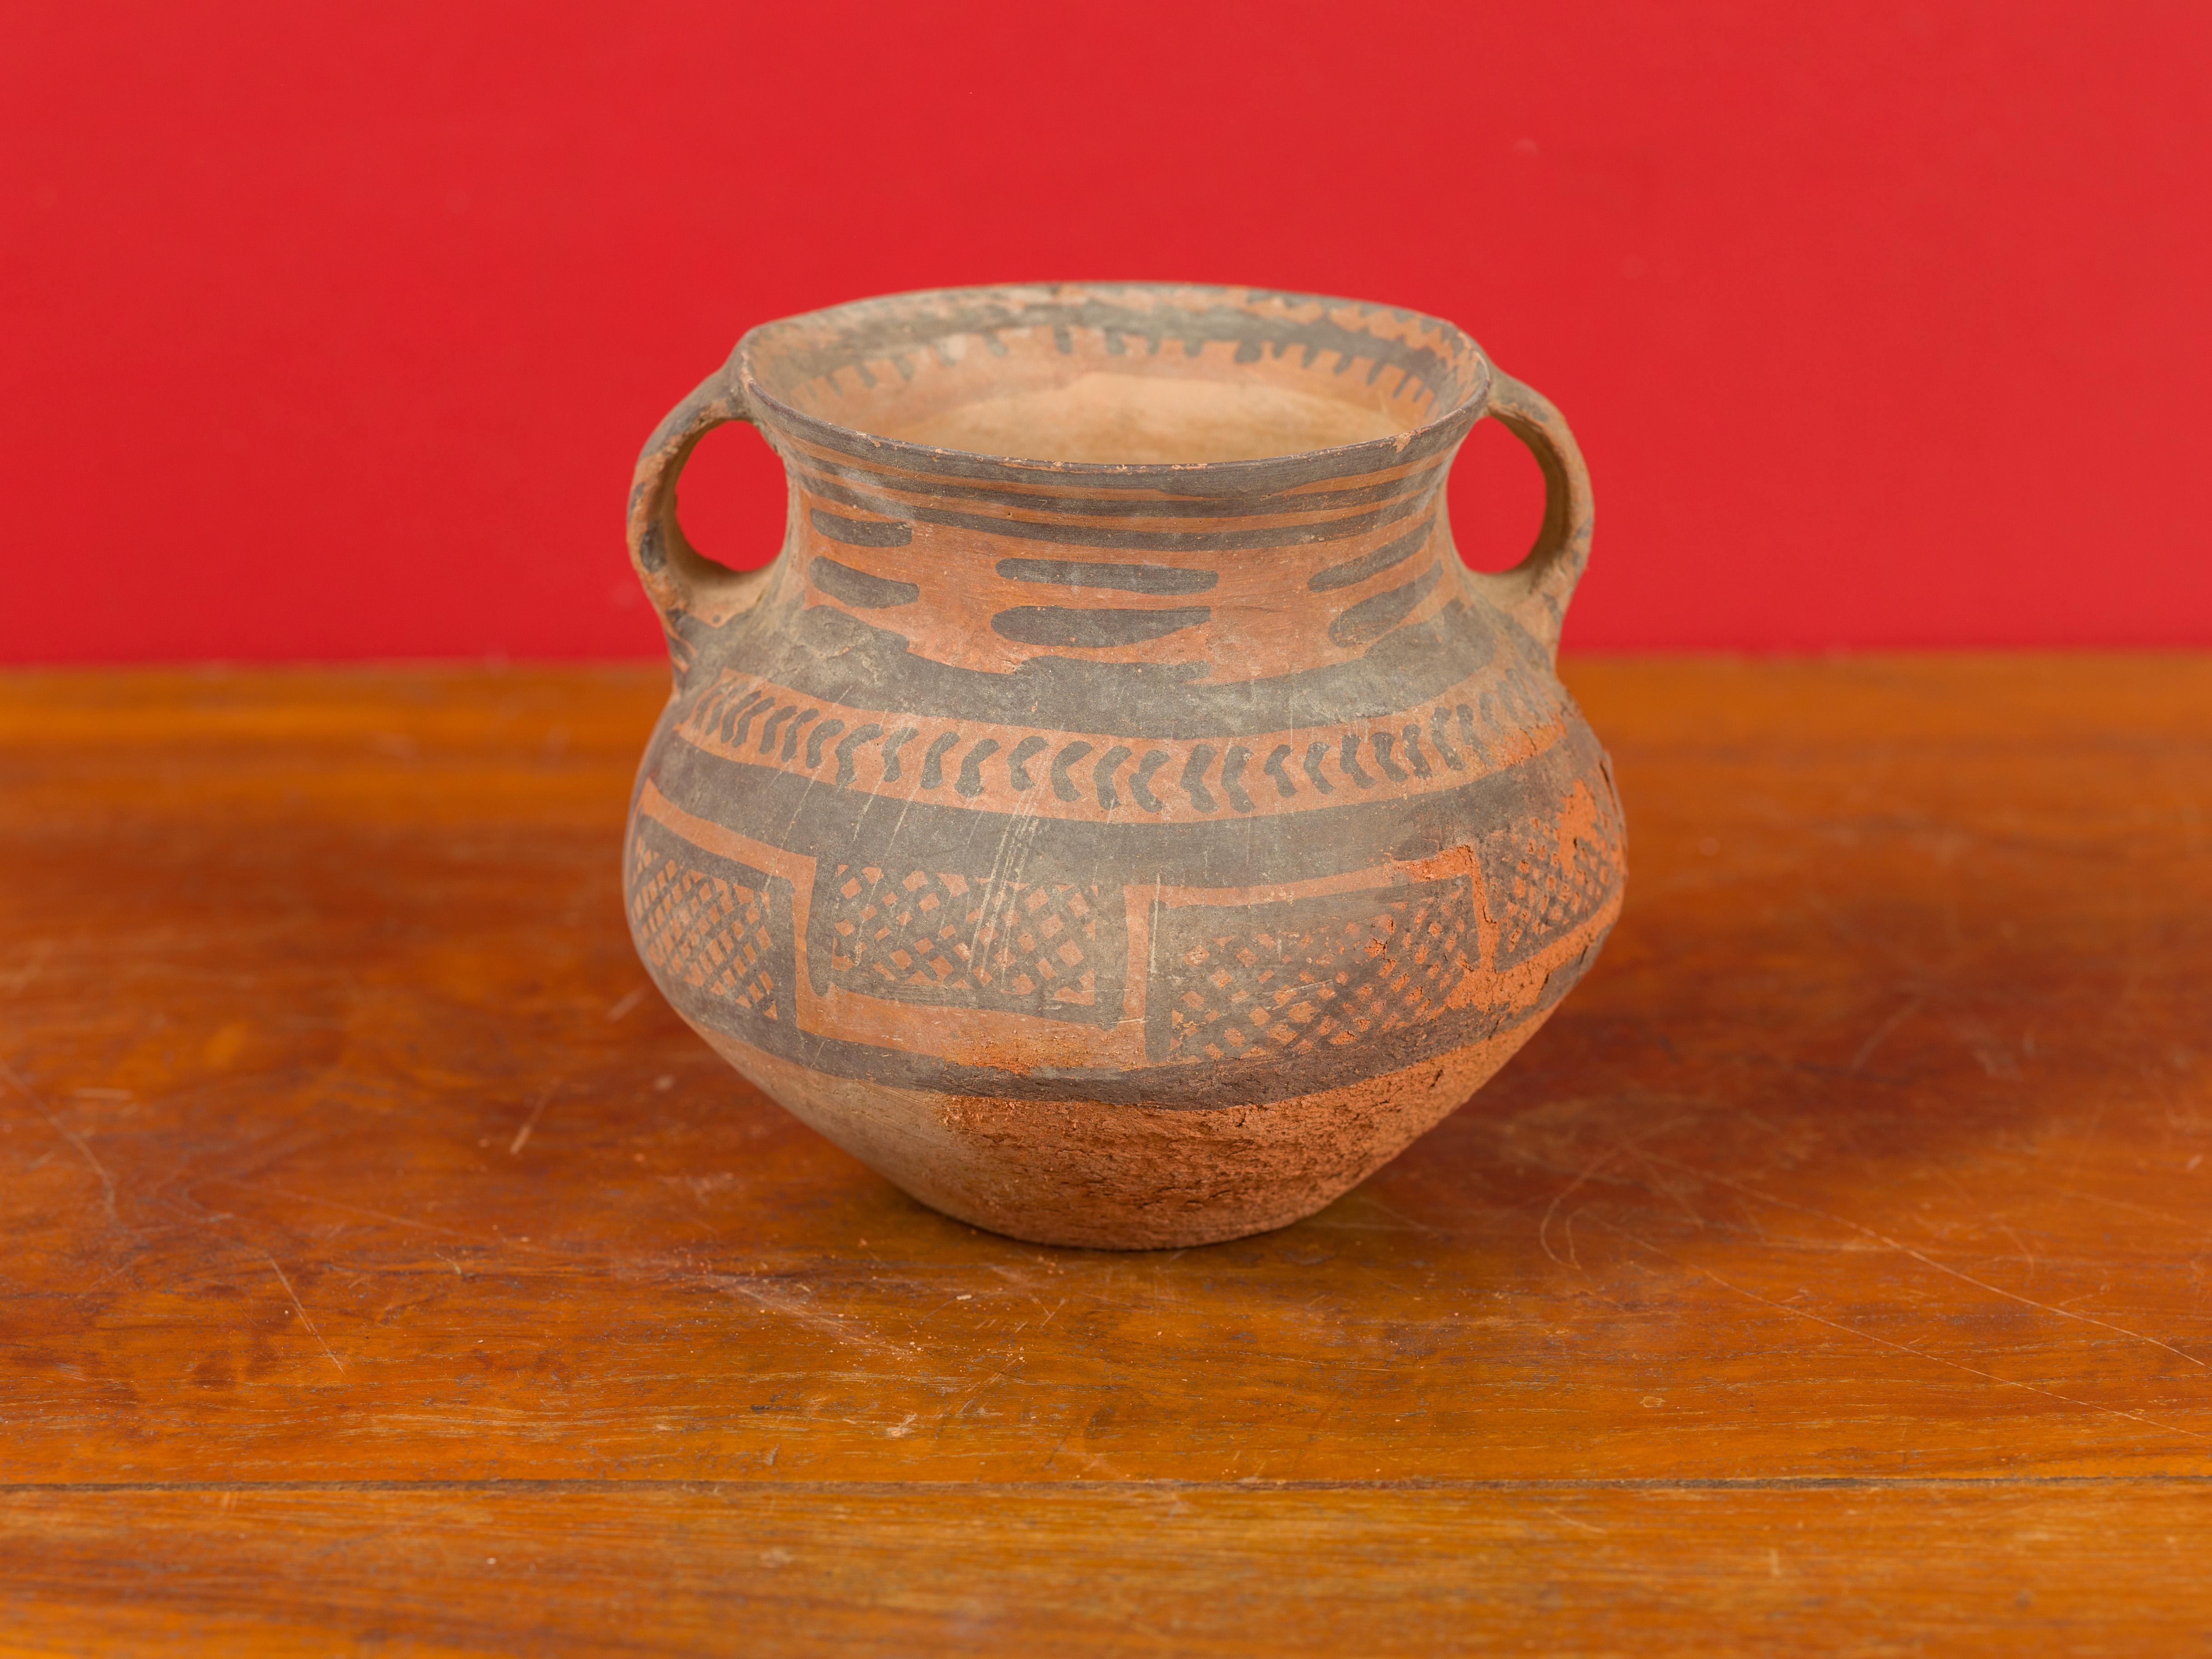 A Neolithic Chinese terracotta pottery from 4000-3000 BC, with lateral handles and brown painted geometric decor. Born in China during the Neolithic period, this pitcher attracts our attention with its nice patina, simple lines and geometric motifs.